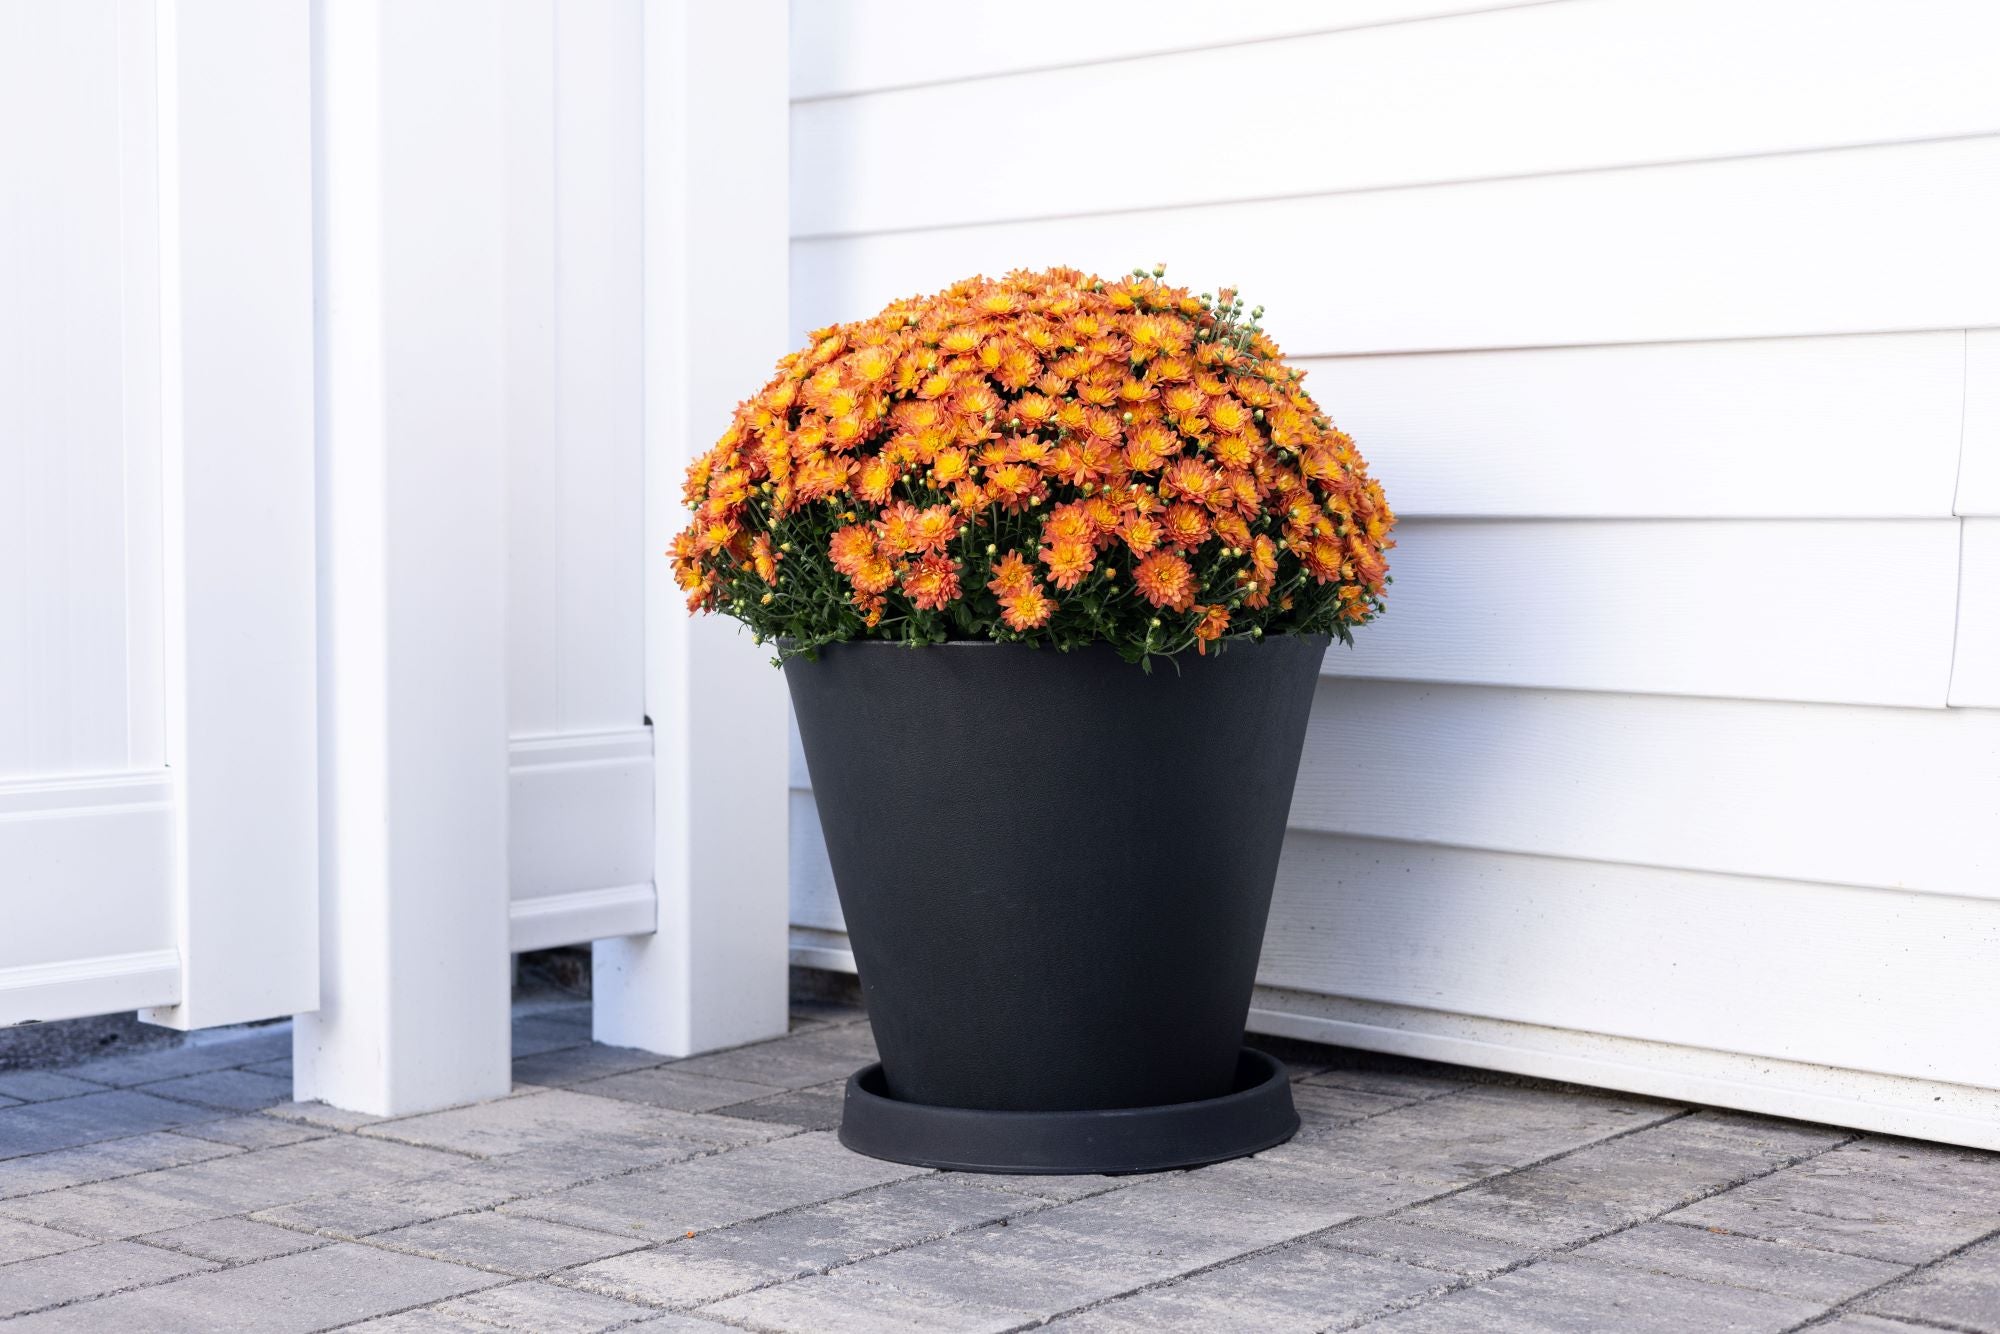 Why Tusco Products are the Perfect Planter Solution